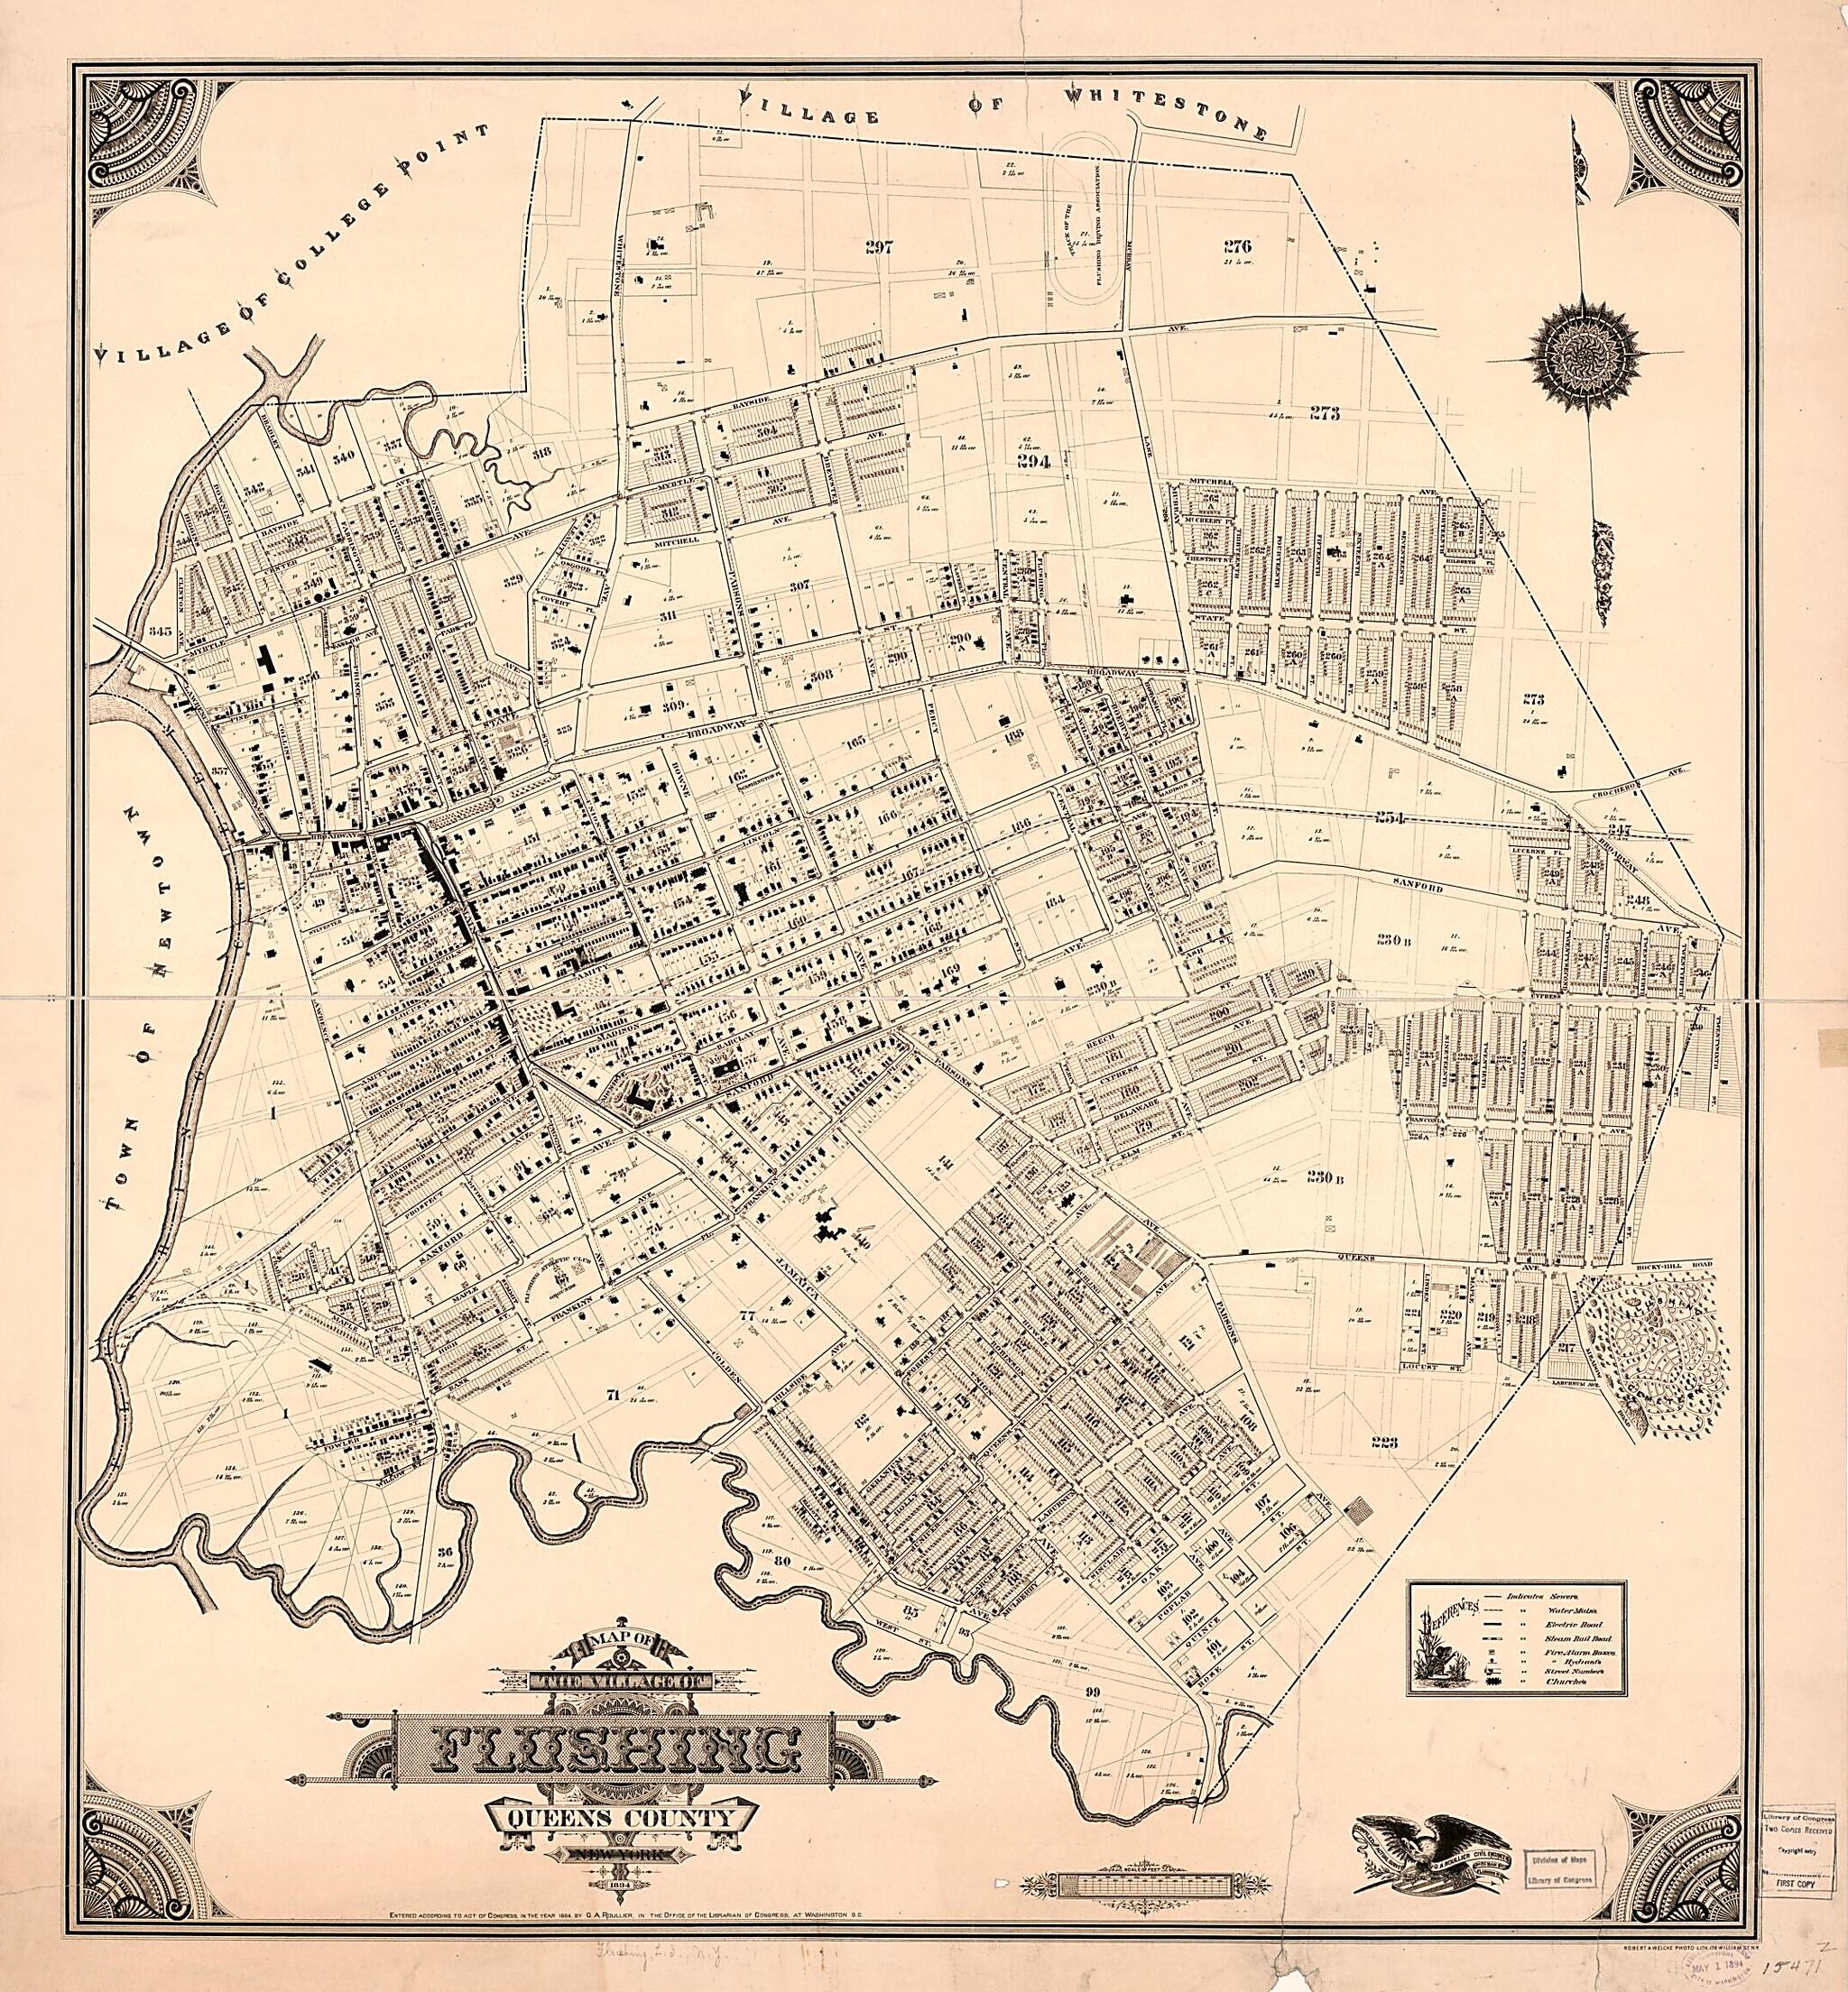 This old map of Map of the Village of Flushing, Queens County, New York : from 1894 was created by G. A. Roullier, Robert A. Welcke in 1894